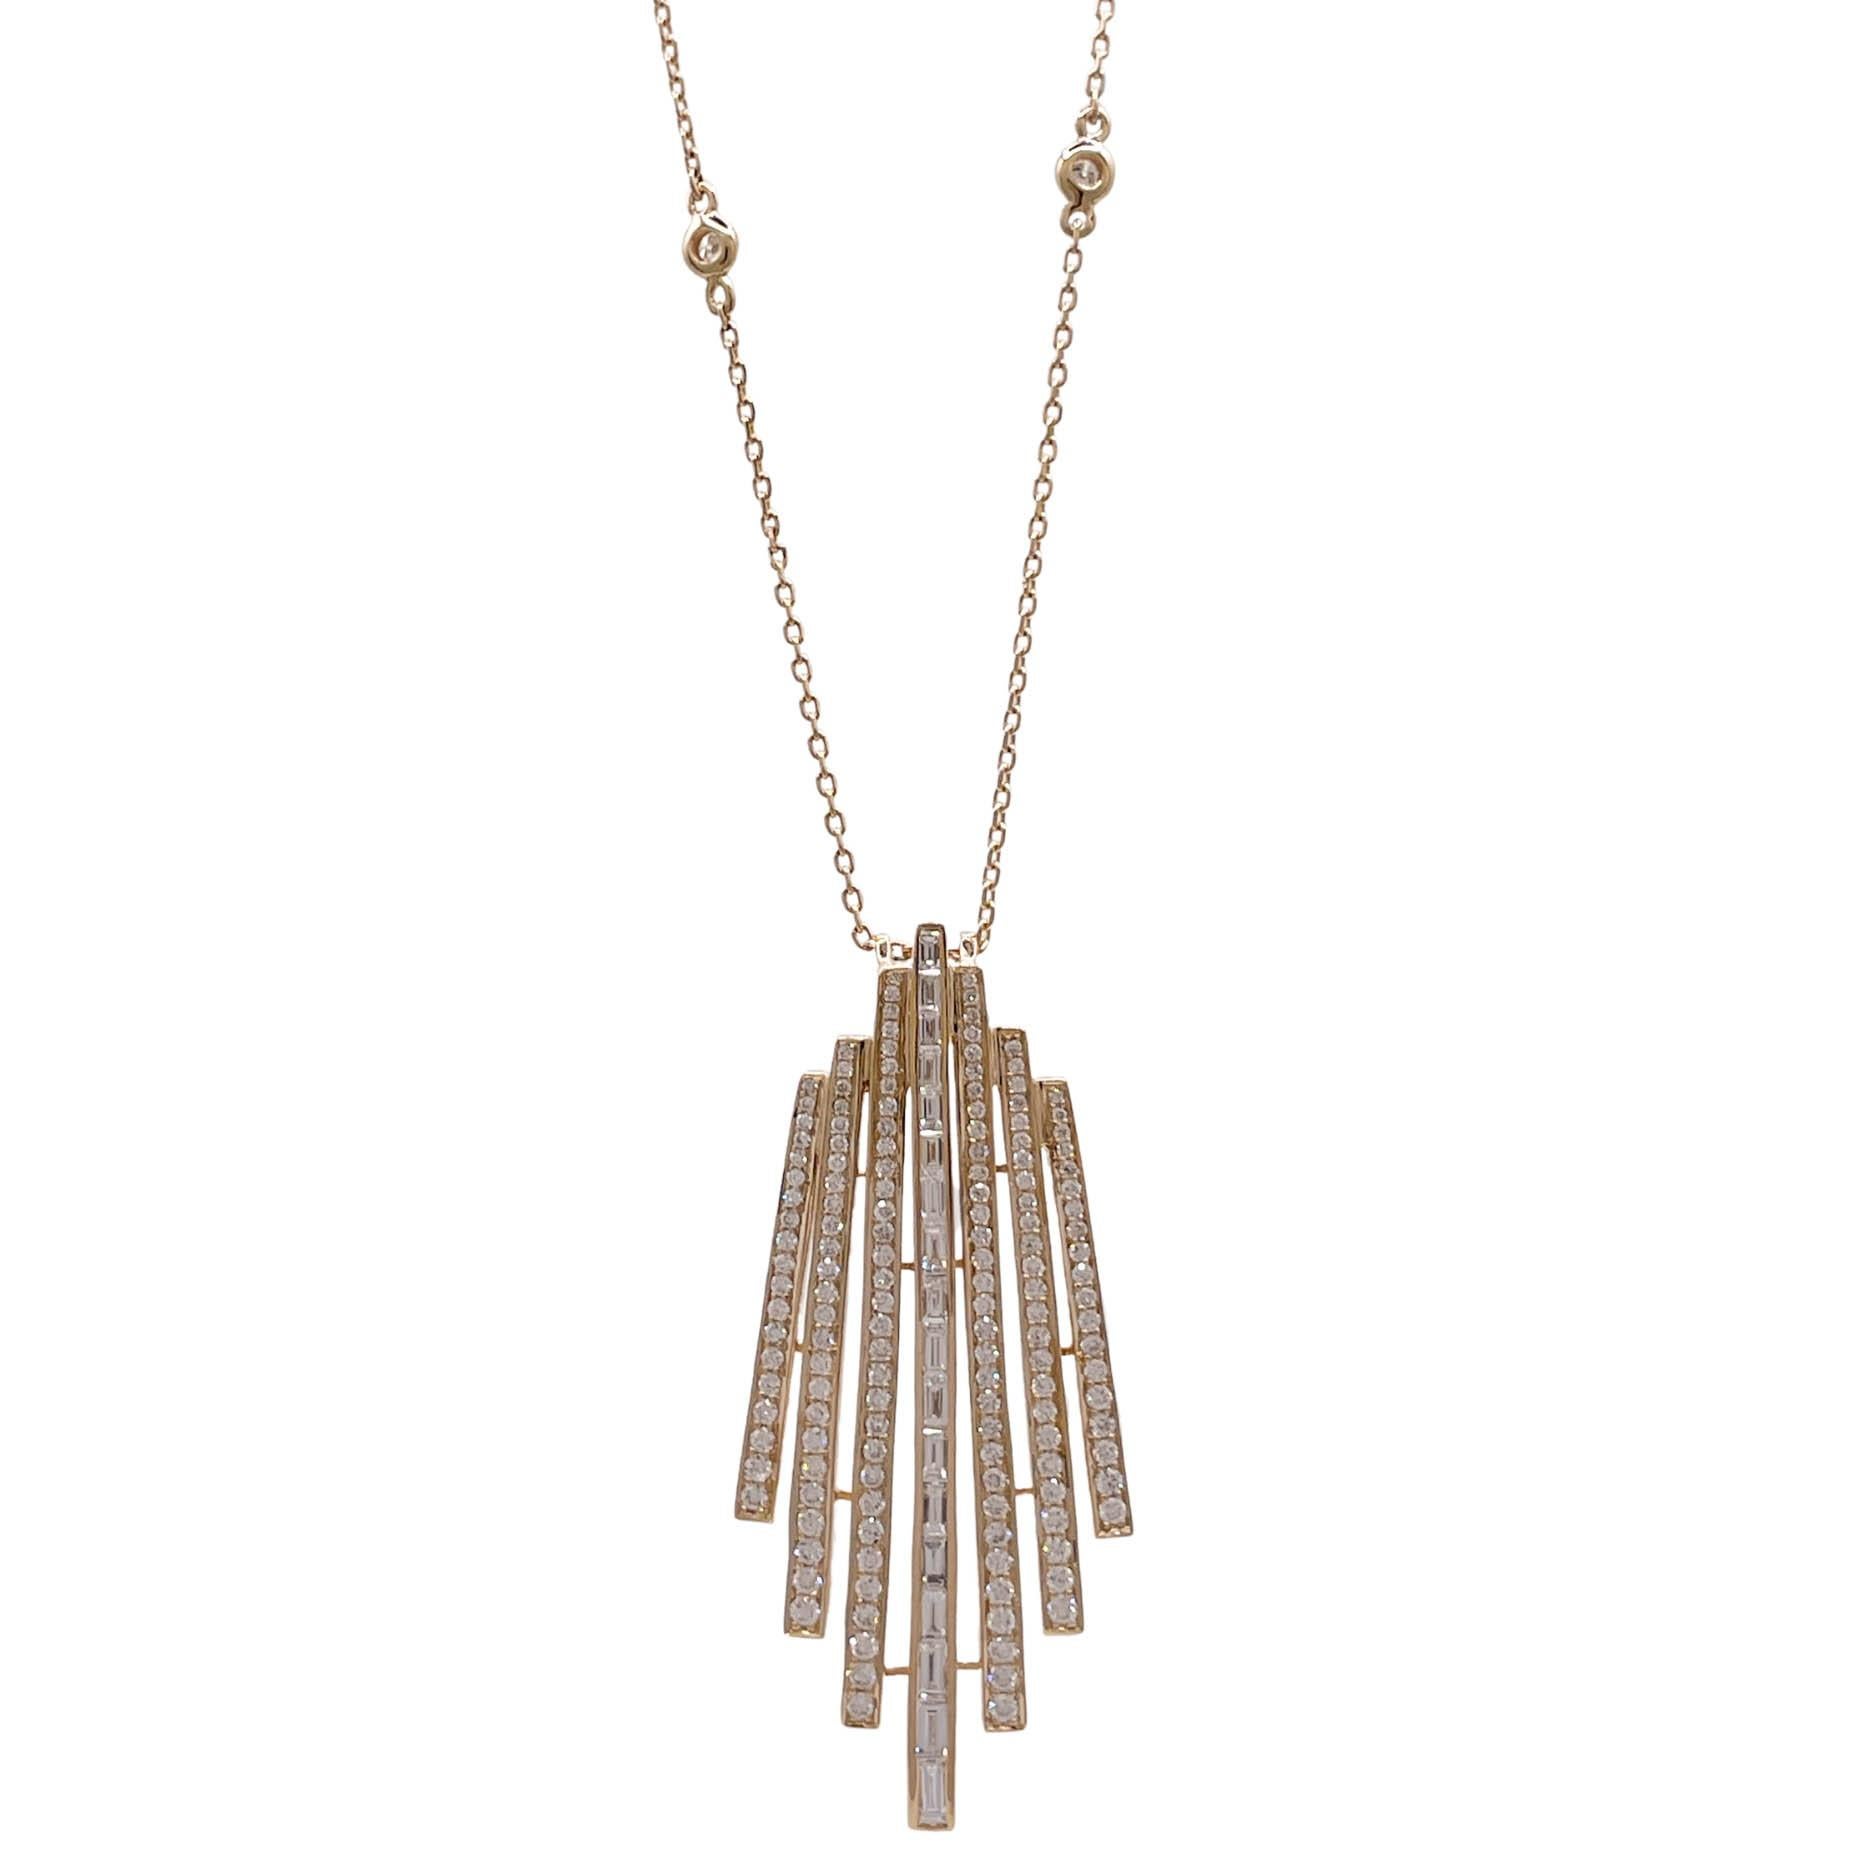 Jay Feder 14k Yellow Gold Diamond 7 Bar Pendant Necklace

Set with 1.38ctw round diamond and 0.63ct straight baguettes.

The pendants measurements are 3 inches long and 21.54mm wide. The chain is 18-19.5 inches long. Total weight is 12.9 grams.